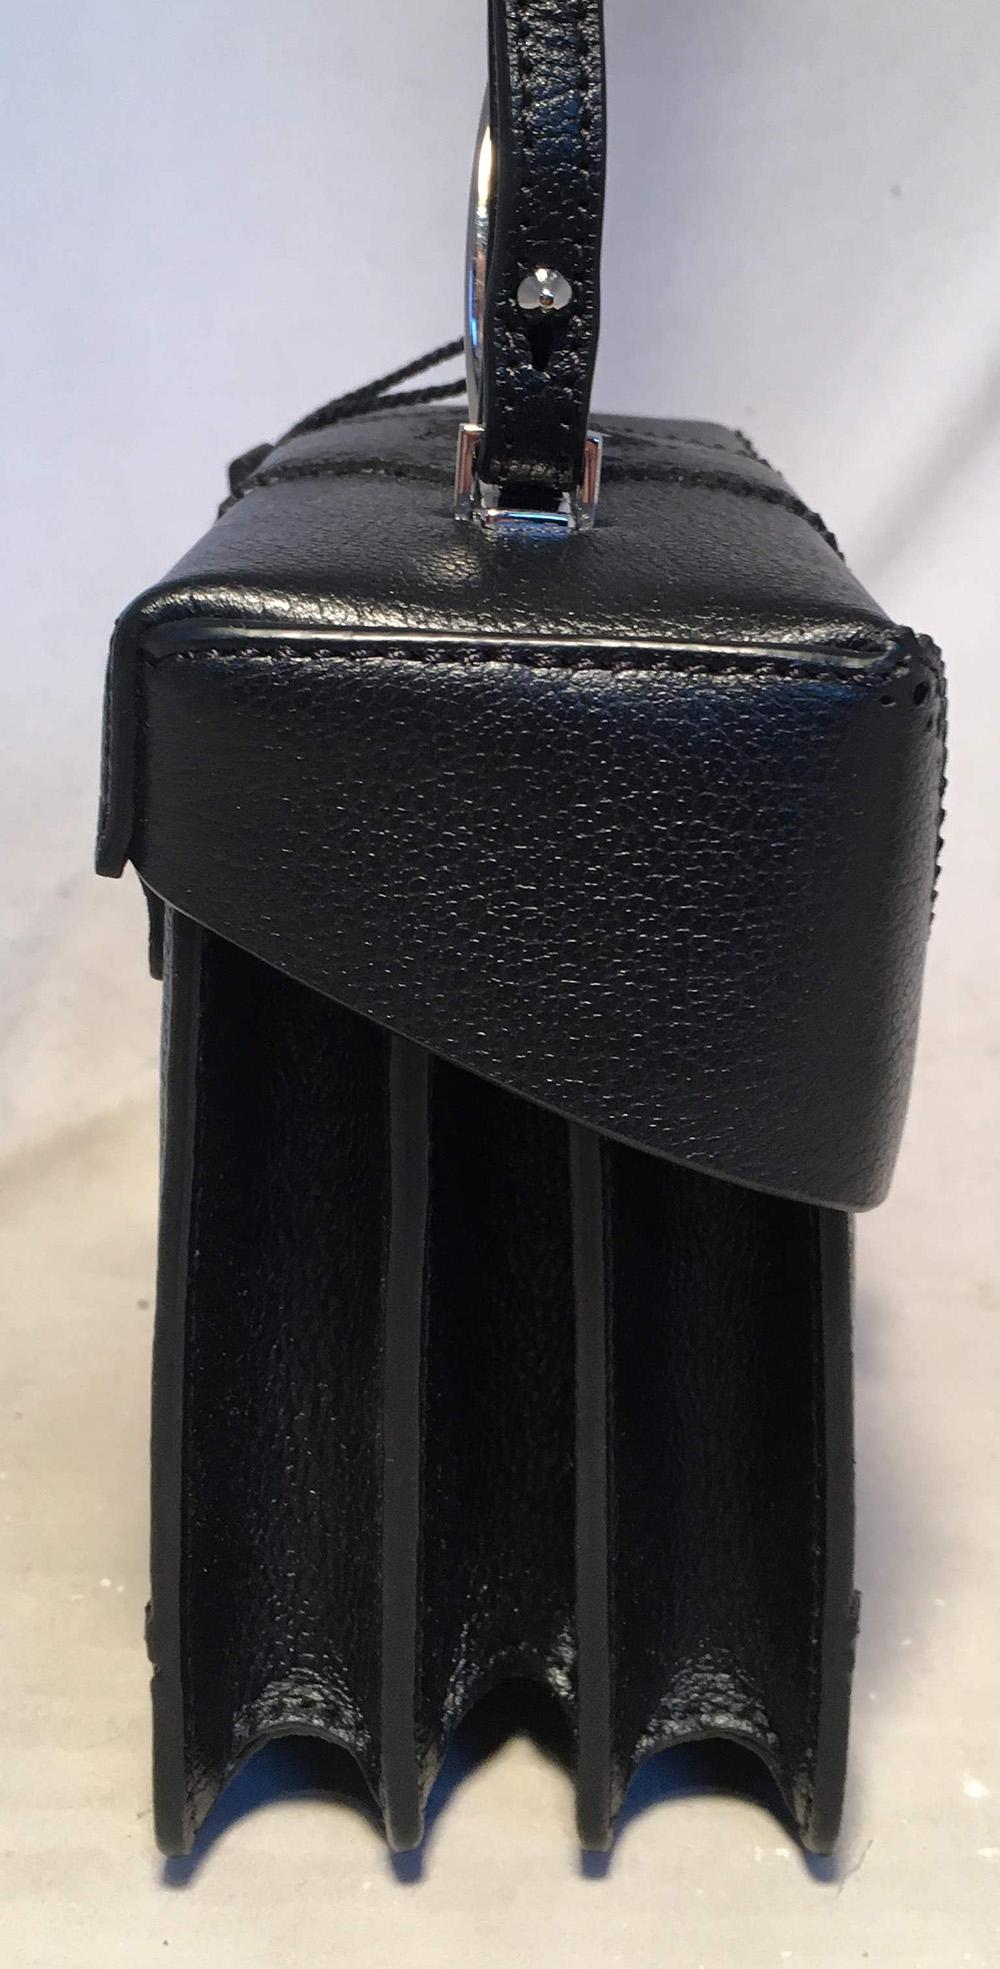  NWT The Volon Black Leather Alice Crossbody Box Shoulder Bag in like new condition. black leather exterior trimmed with embossed leather, a silver leather heart detail on top and trimmed with silver handle and matching black leather shoulder strap.